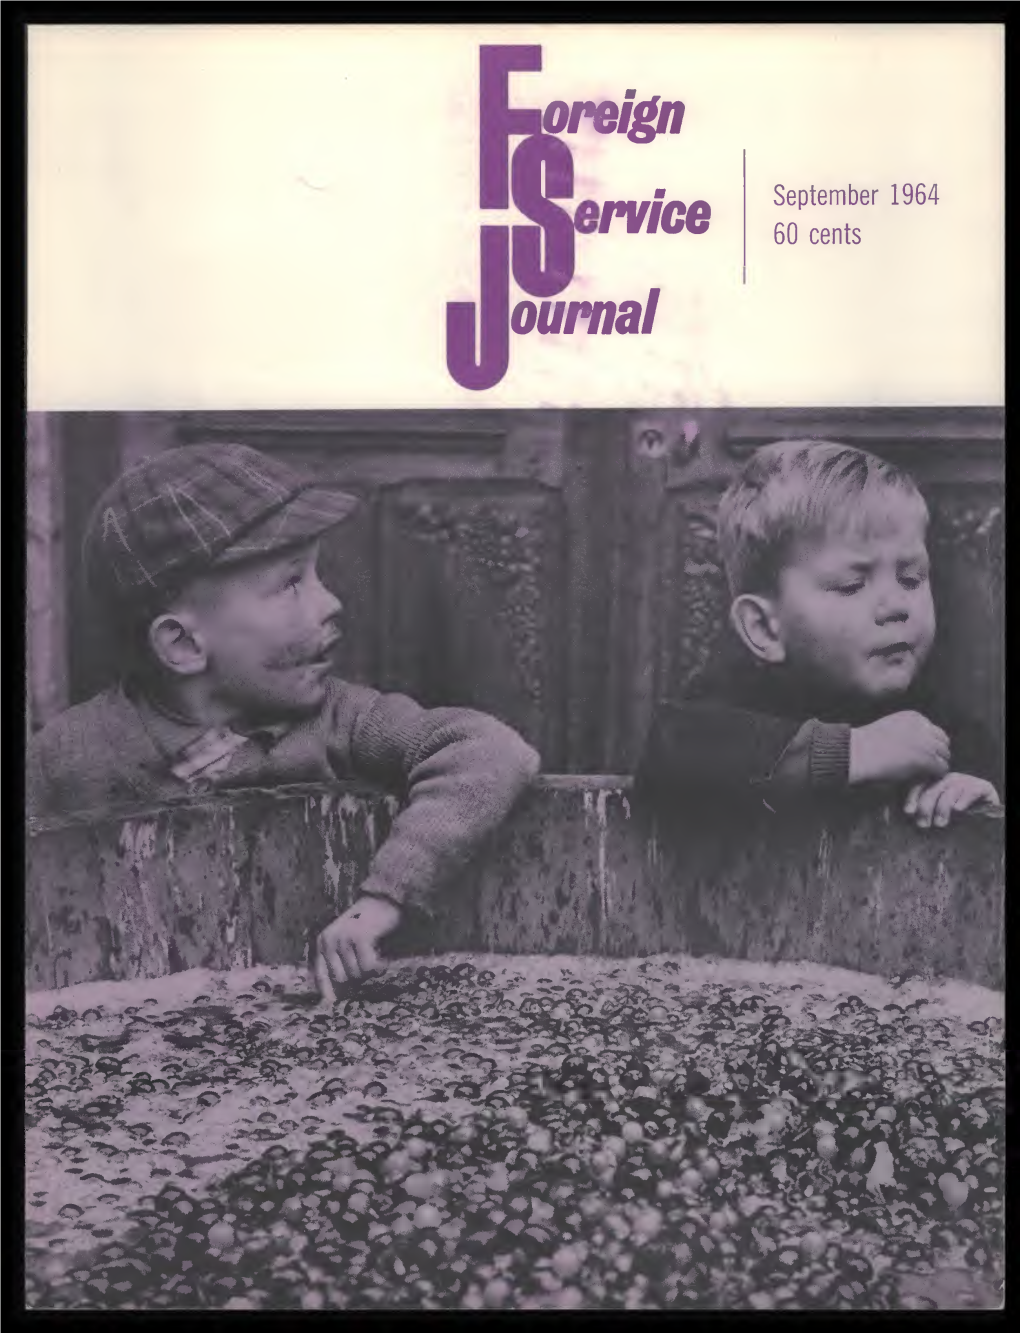 The Foreign Service Journal, September 1964